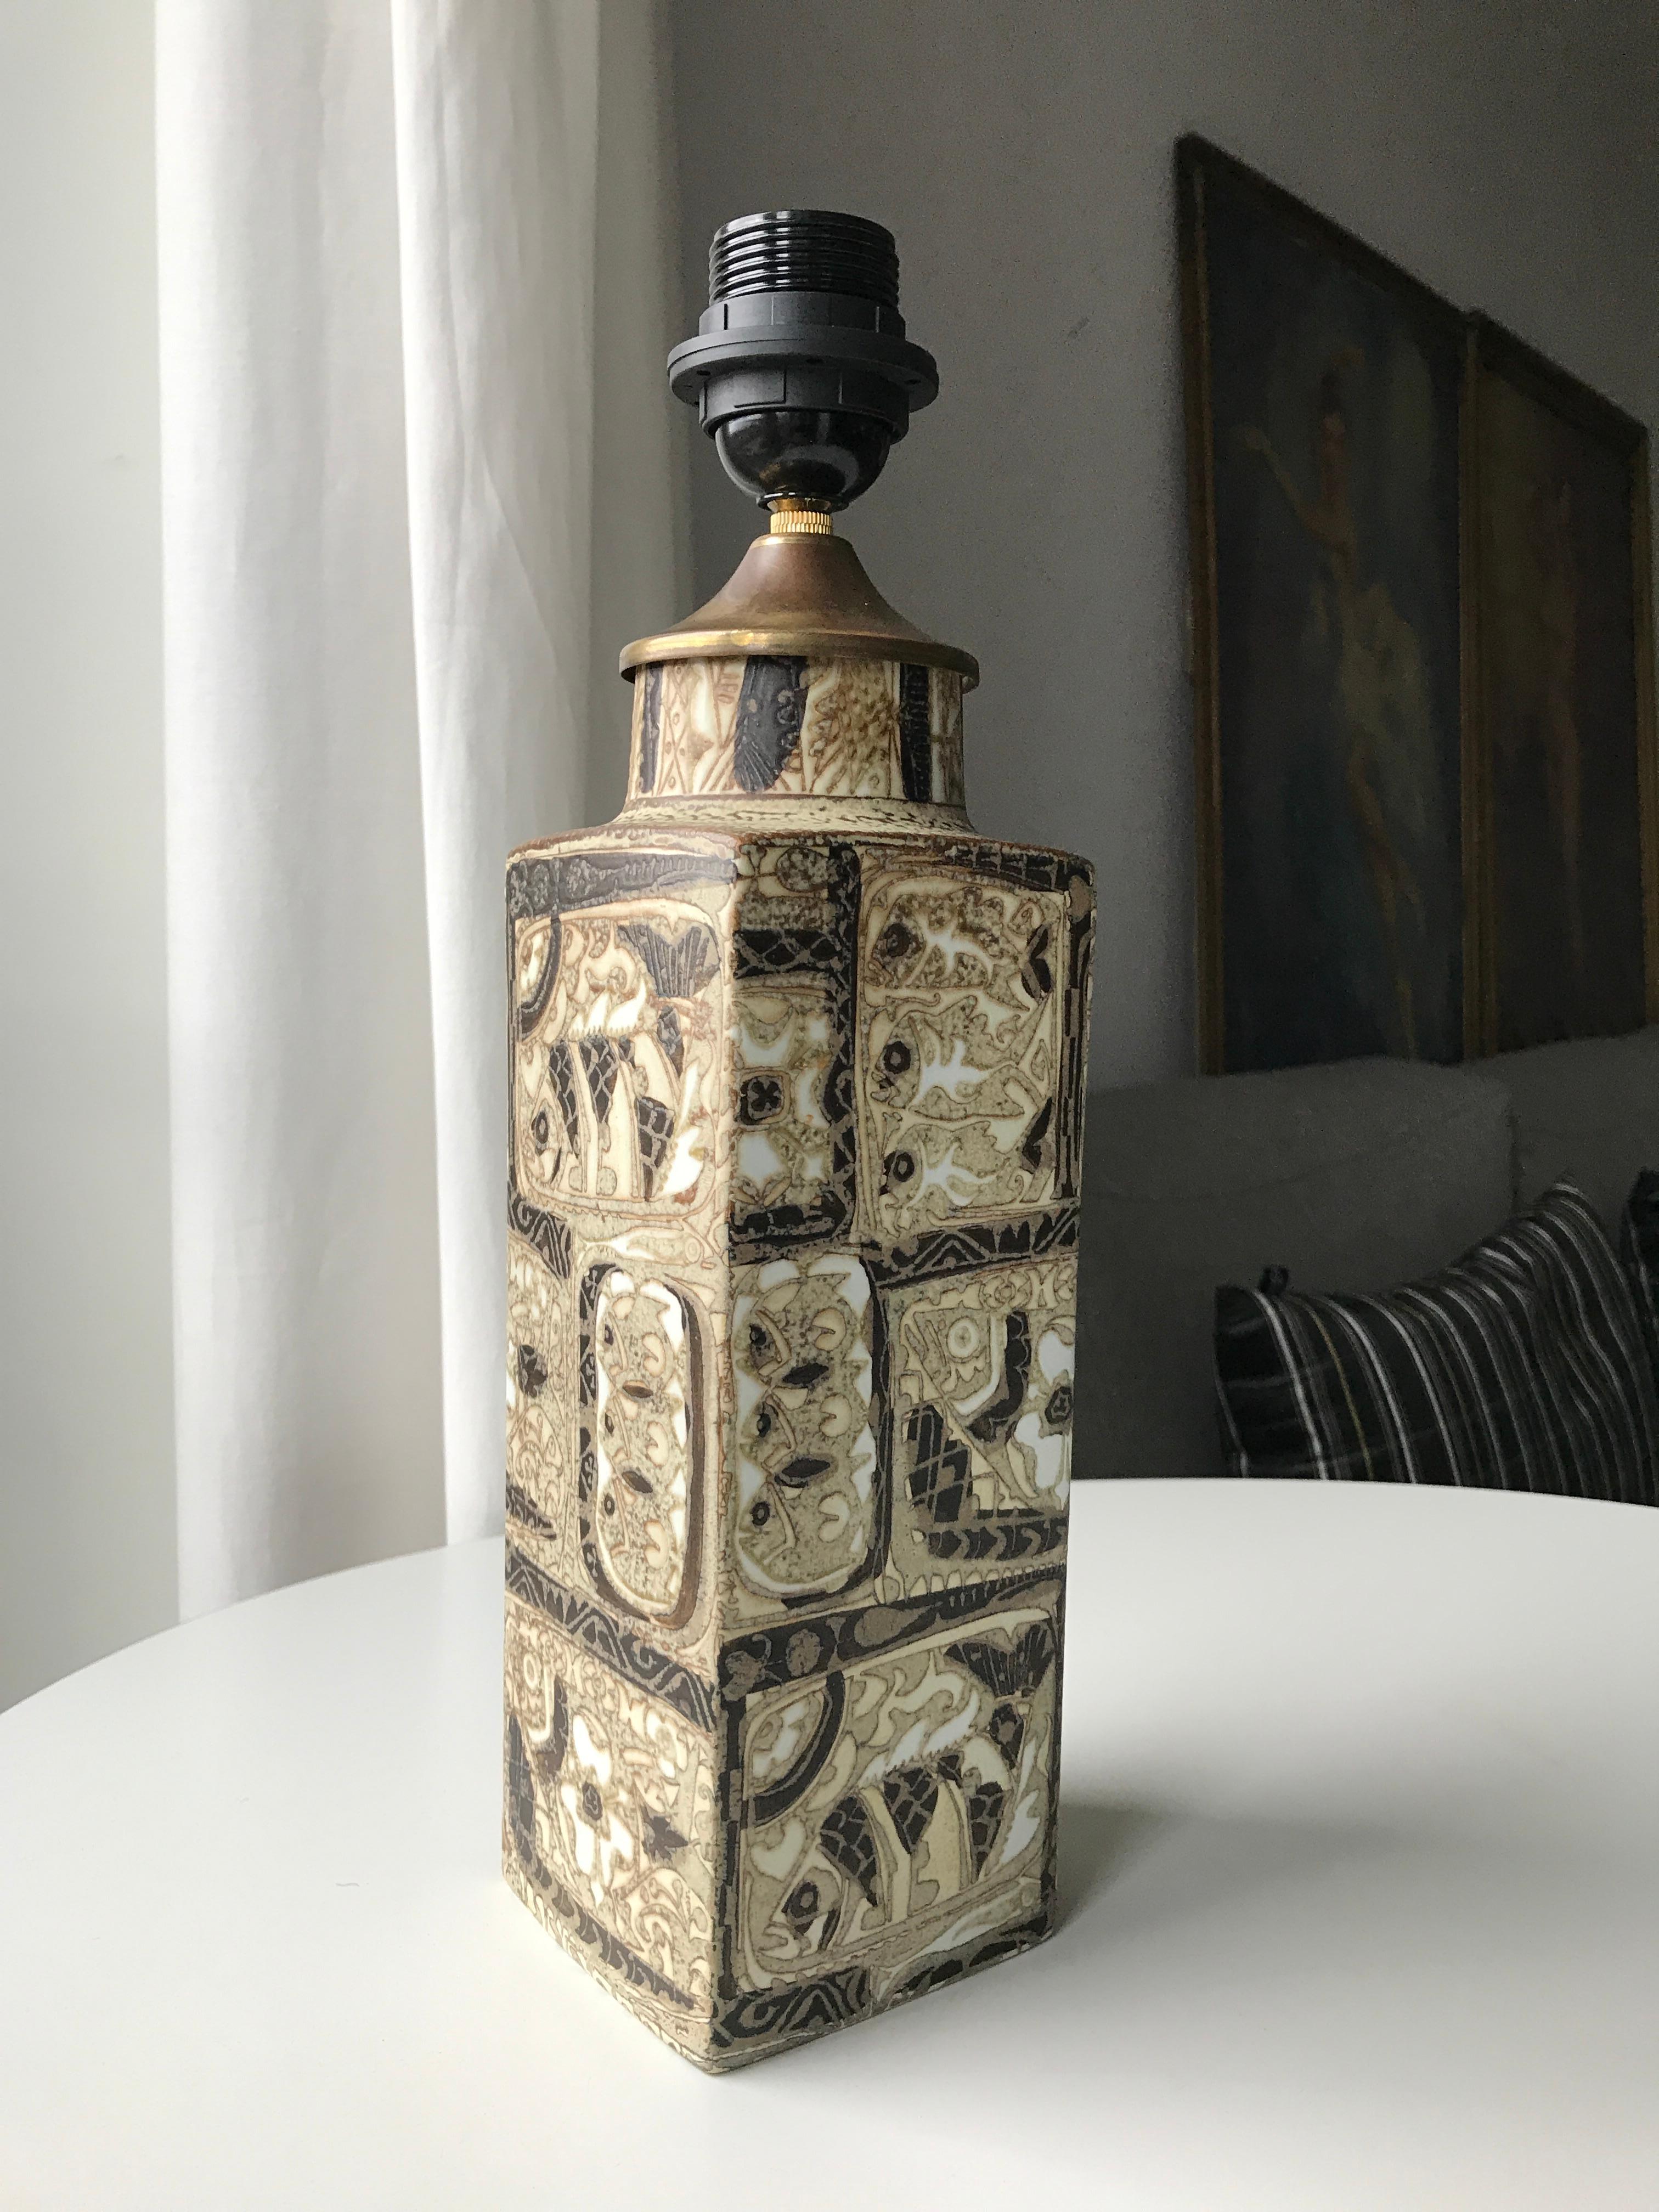 Midcentury Scandinavian Modern Design Baca series grand table lamp designed by Artist Nils Thorsson for Danish Royal Copenhagen Company. The base is made out of stoneware decorated with the typical abstract design from the Baca series with fishes